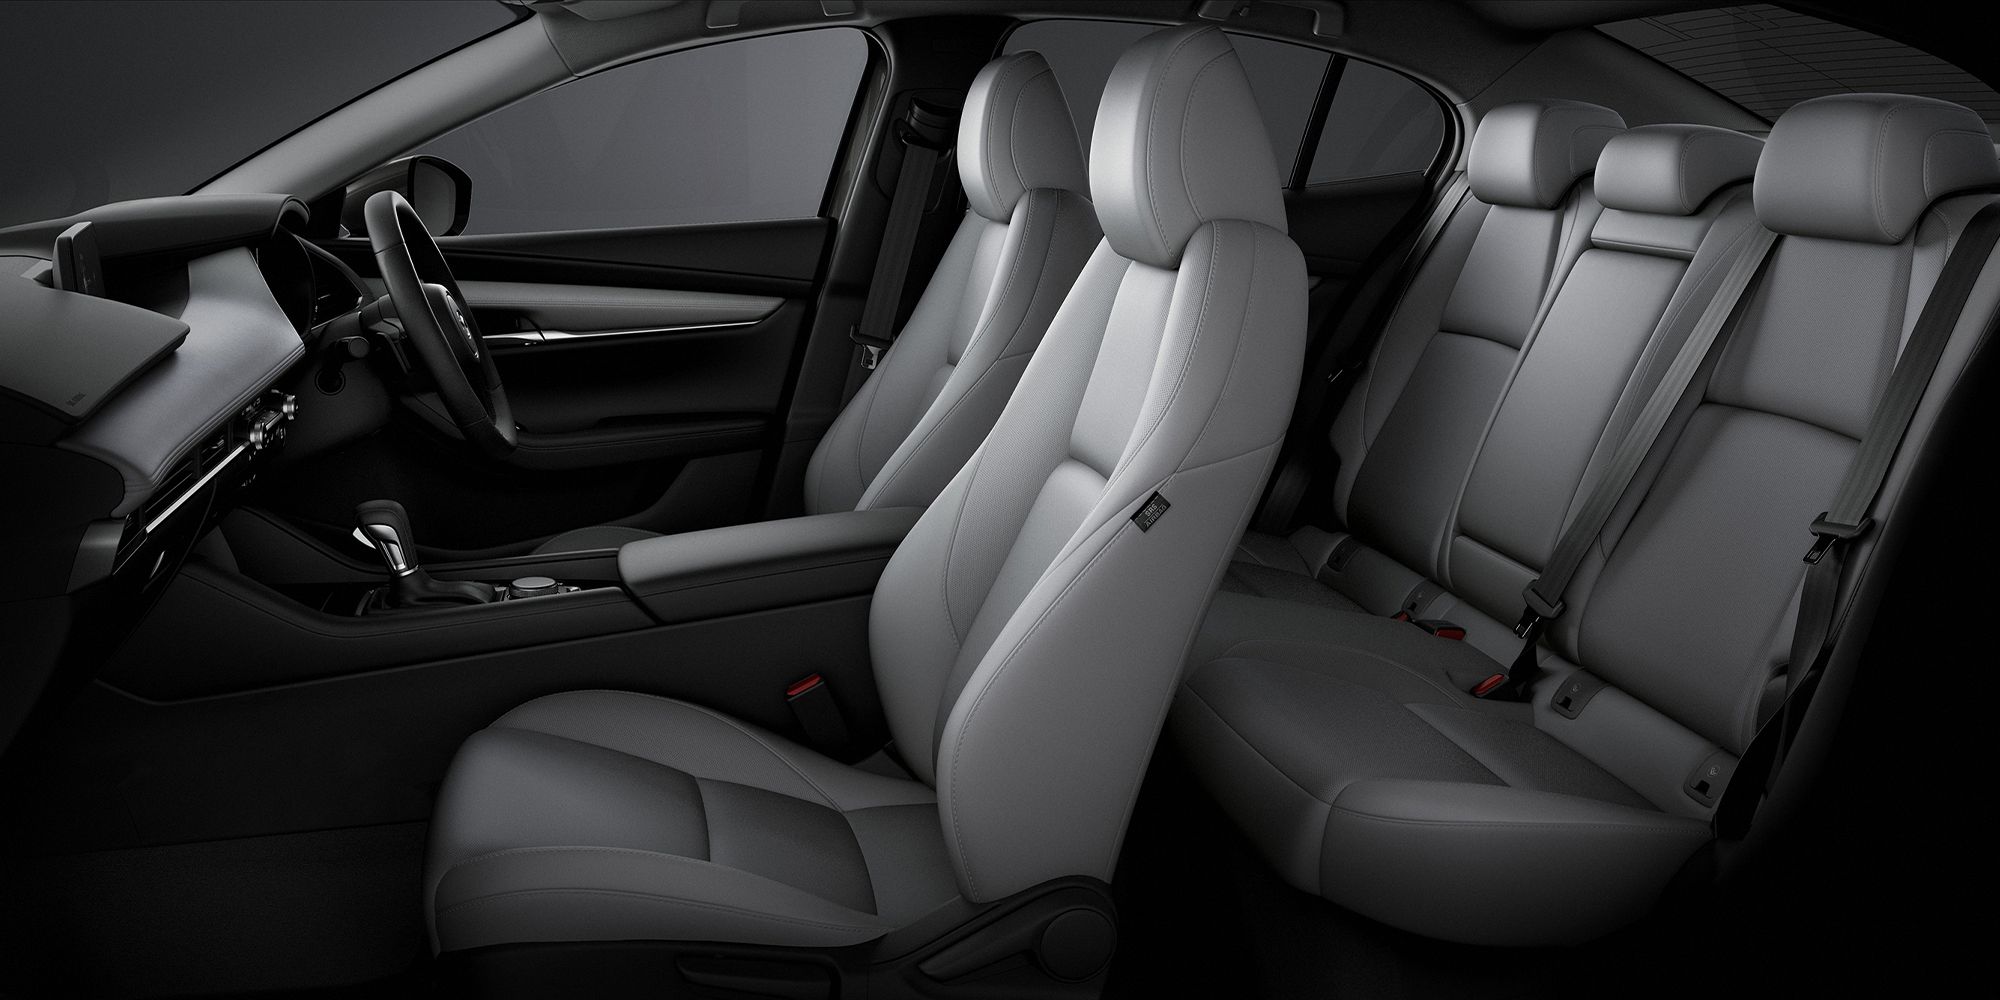 The interior of the Mazda 3, front and rear seats